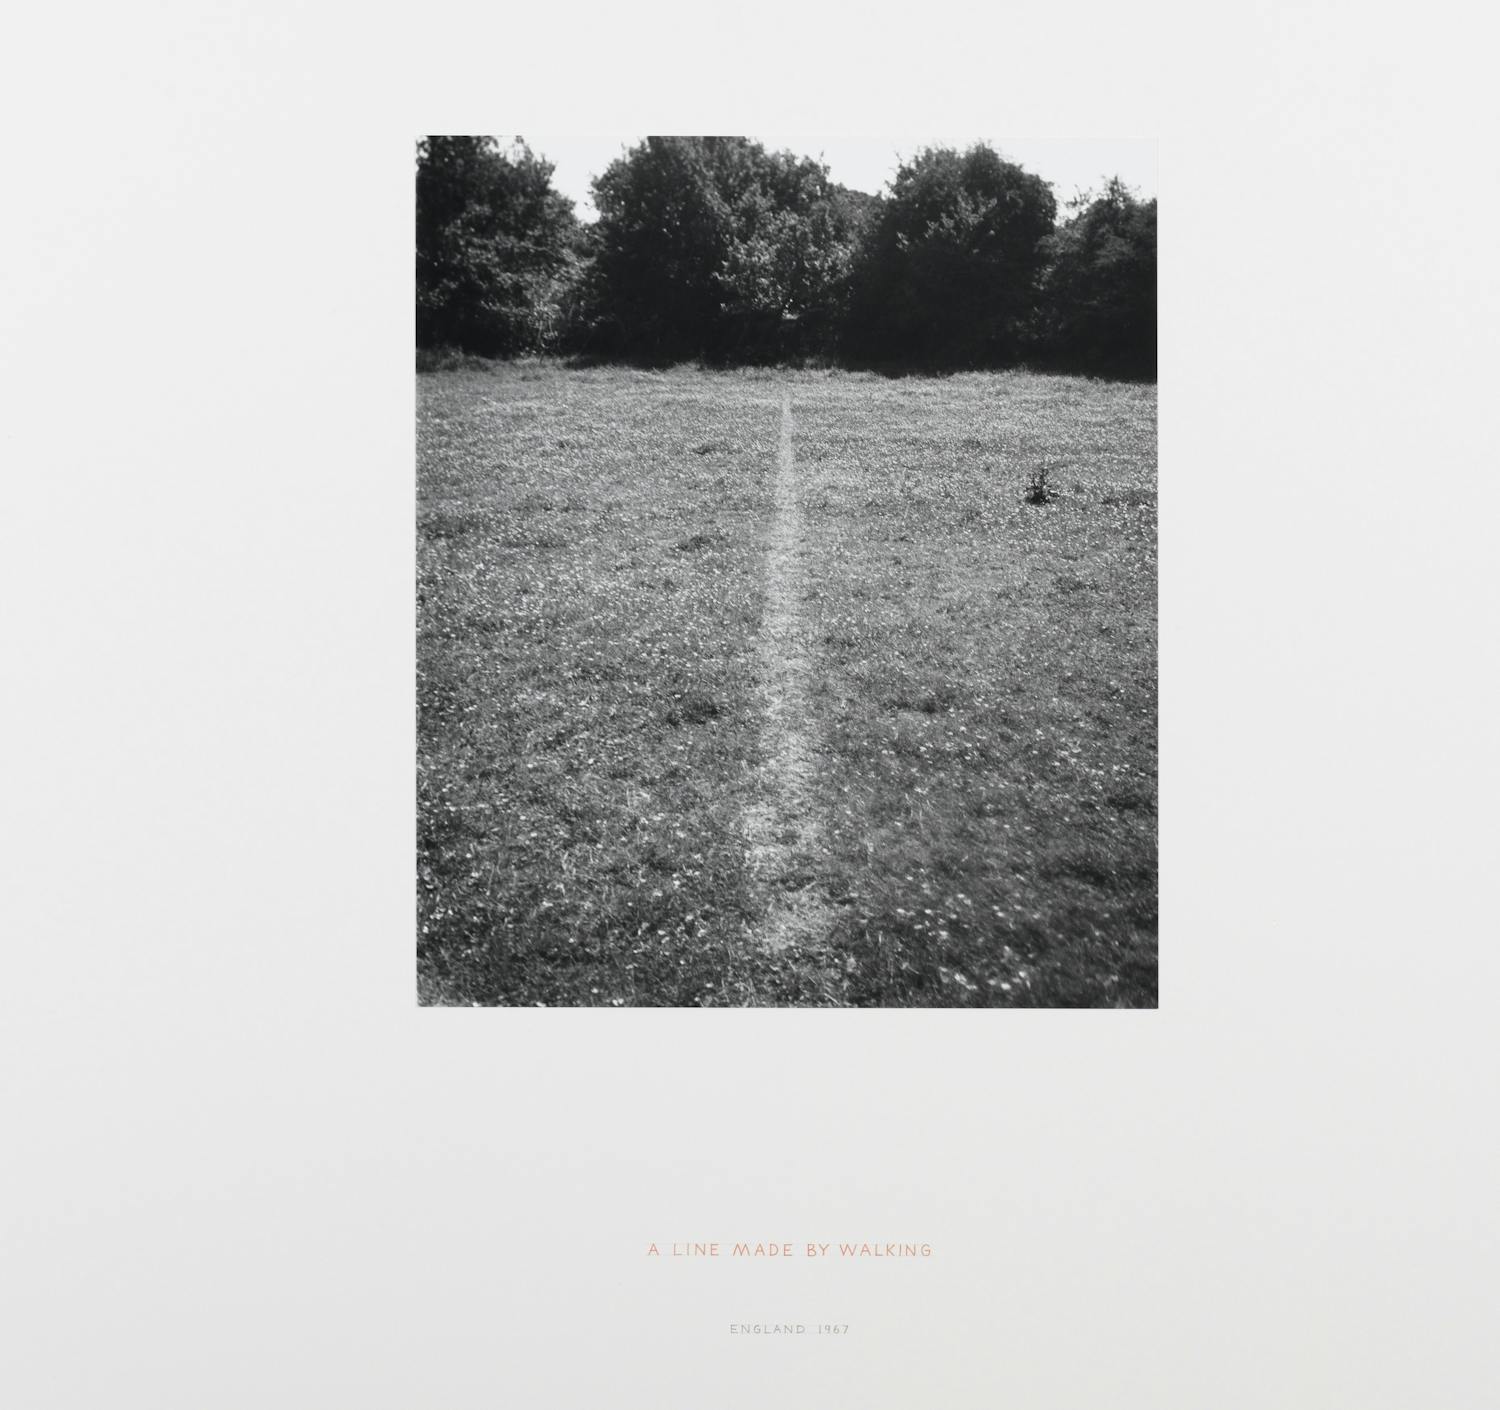 [ID: The image is a black and white photograph positioned on a grey sheet of paper. At the bottom two lines of text are written; ‘A LINE MADE BY WALKING’ in red and ‘ENGLAND 1967’ in black. The photograph shows a field of grass, through which a line has been vertically traced. End of ID]